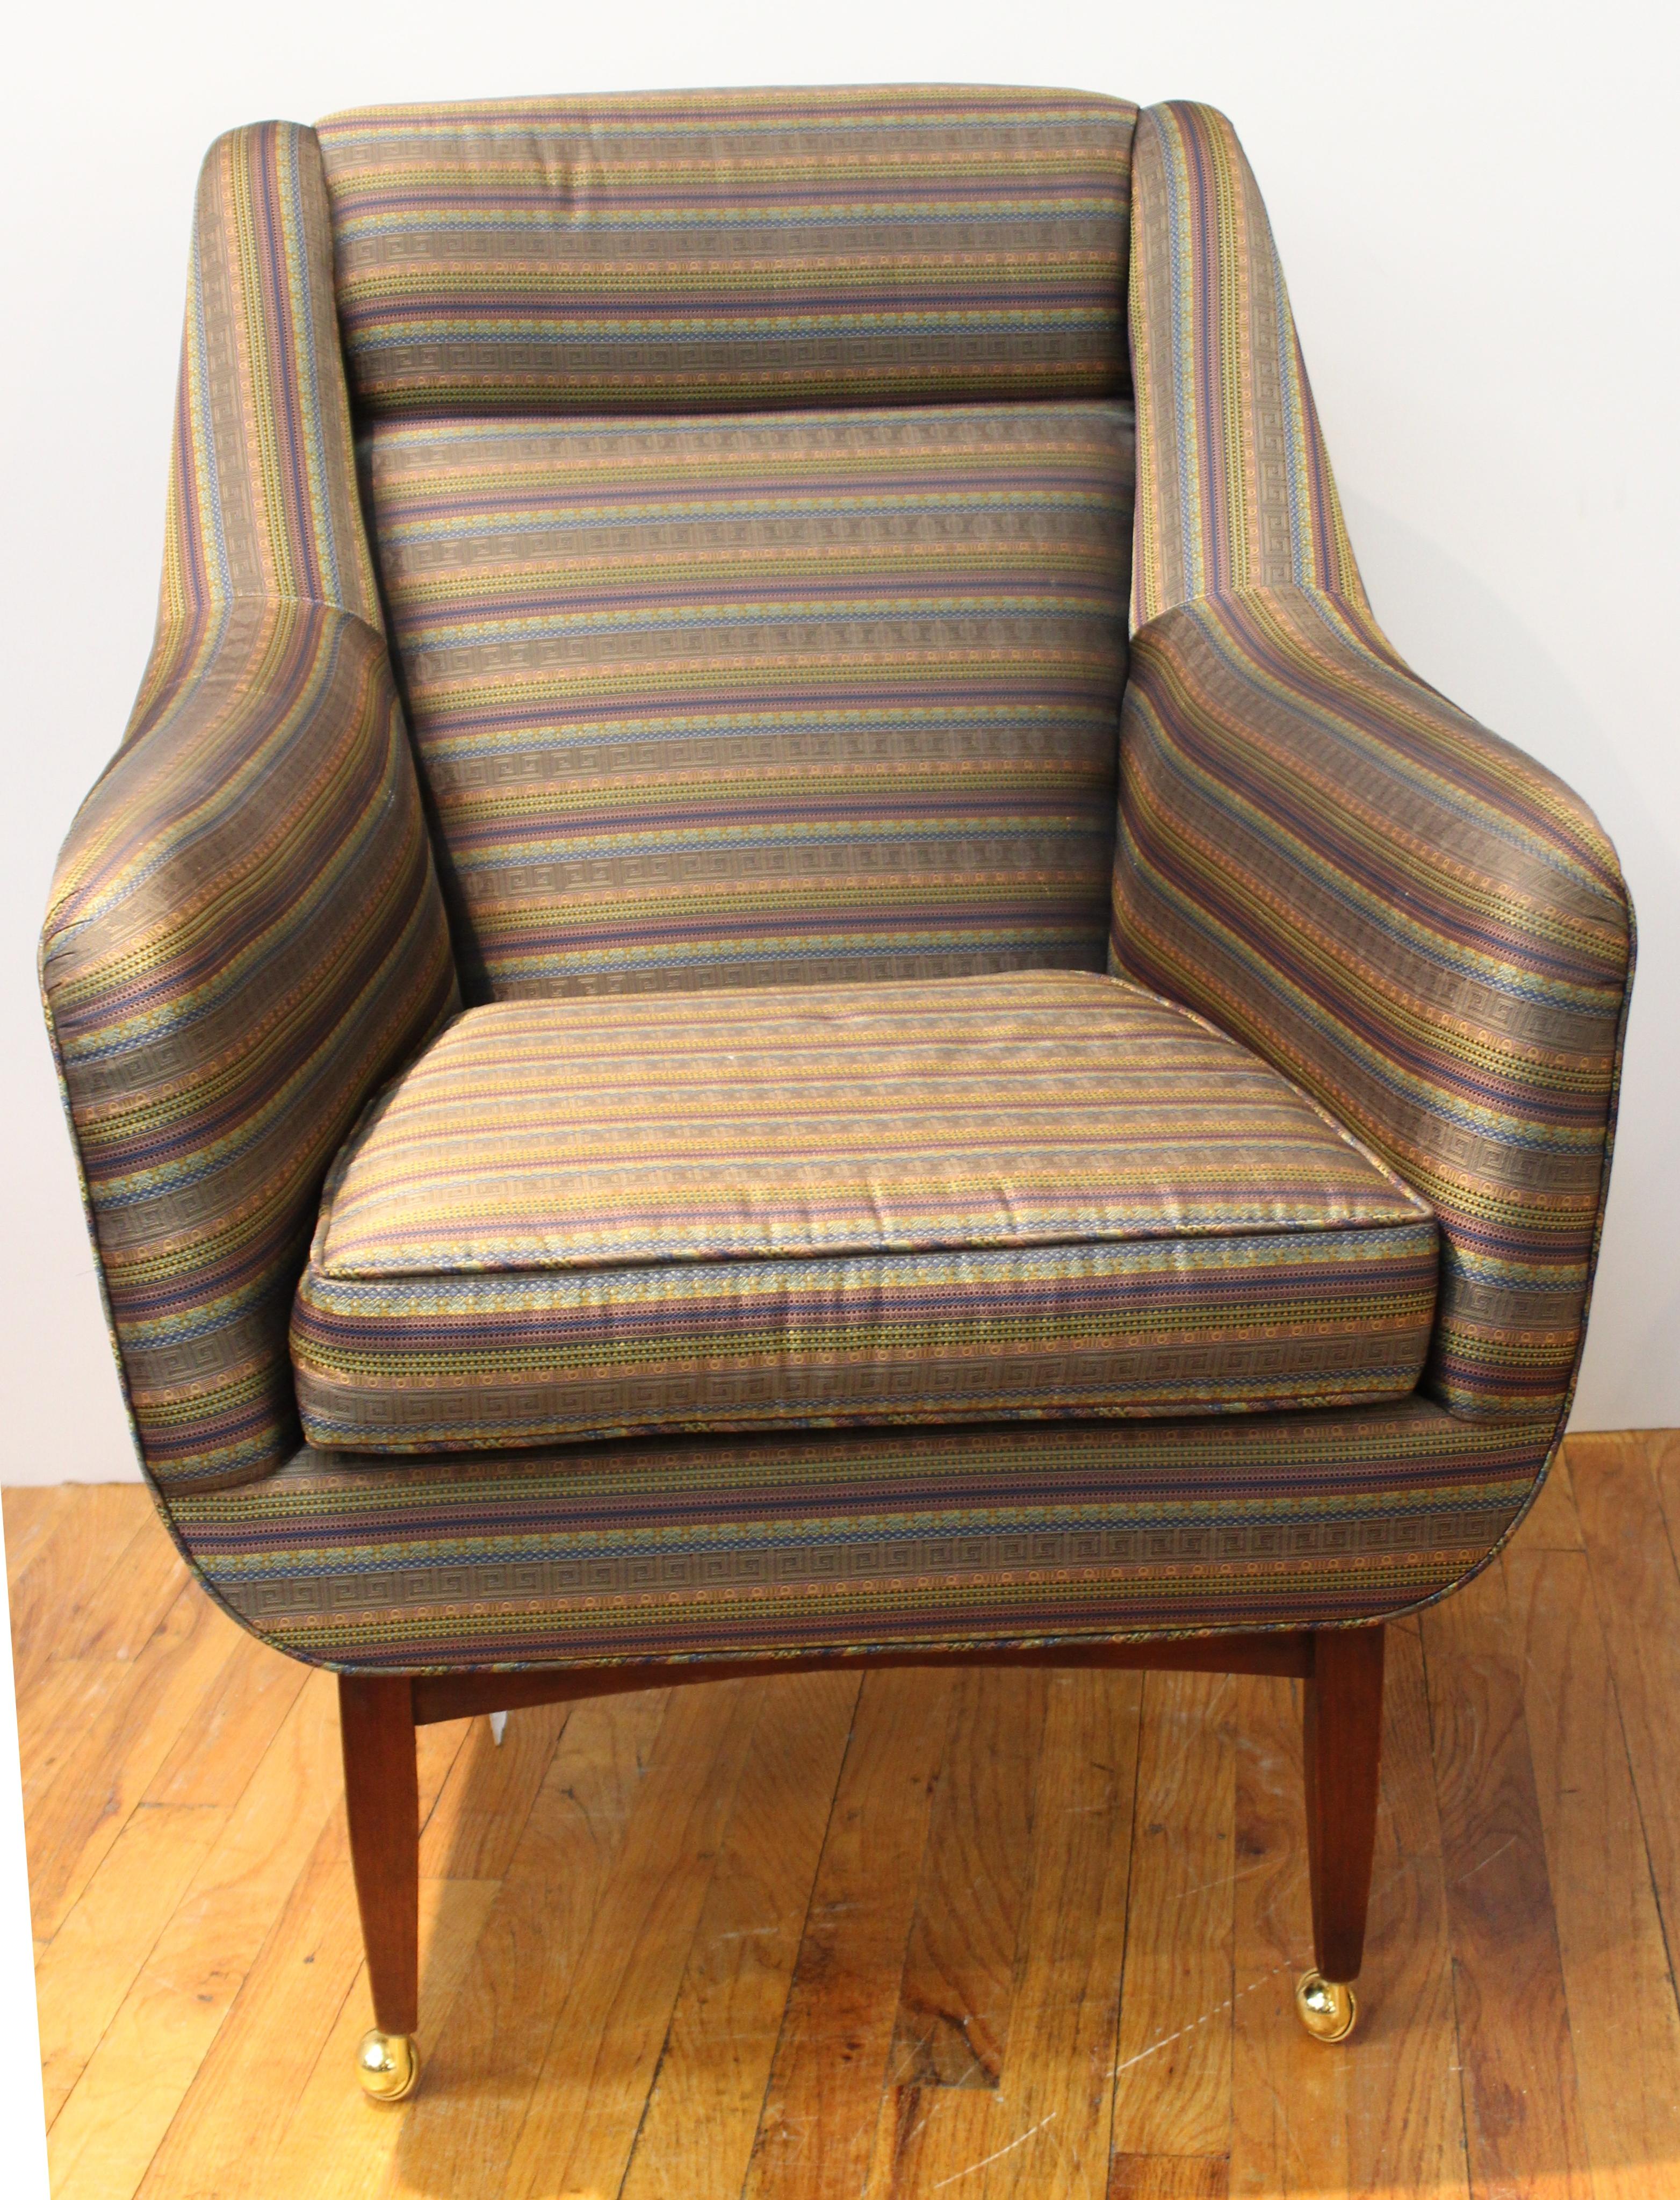 20th Century Mid-Century Modern Armchair with Foot Stool on Casters